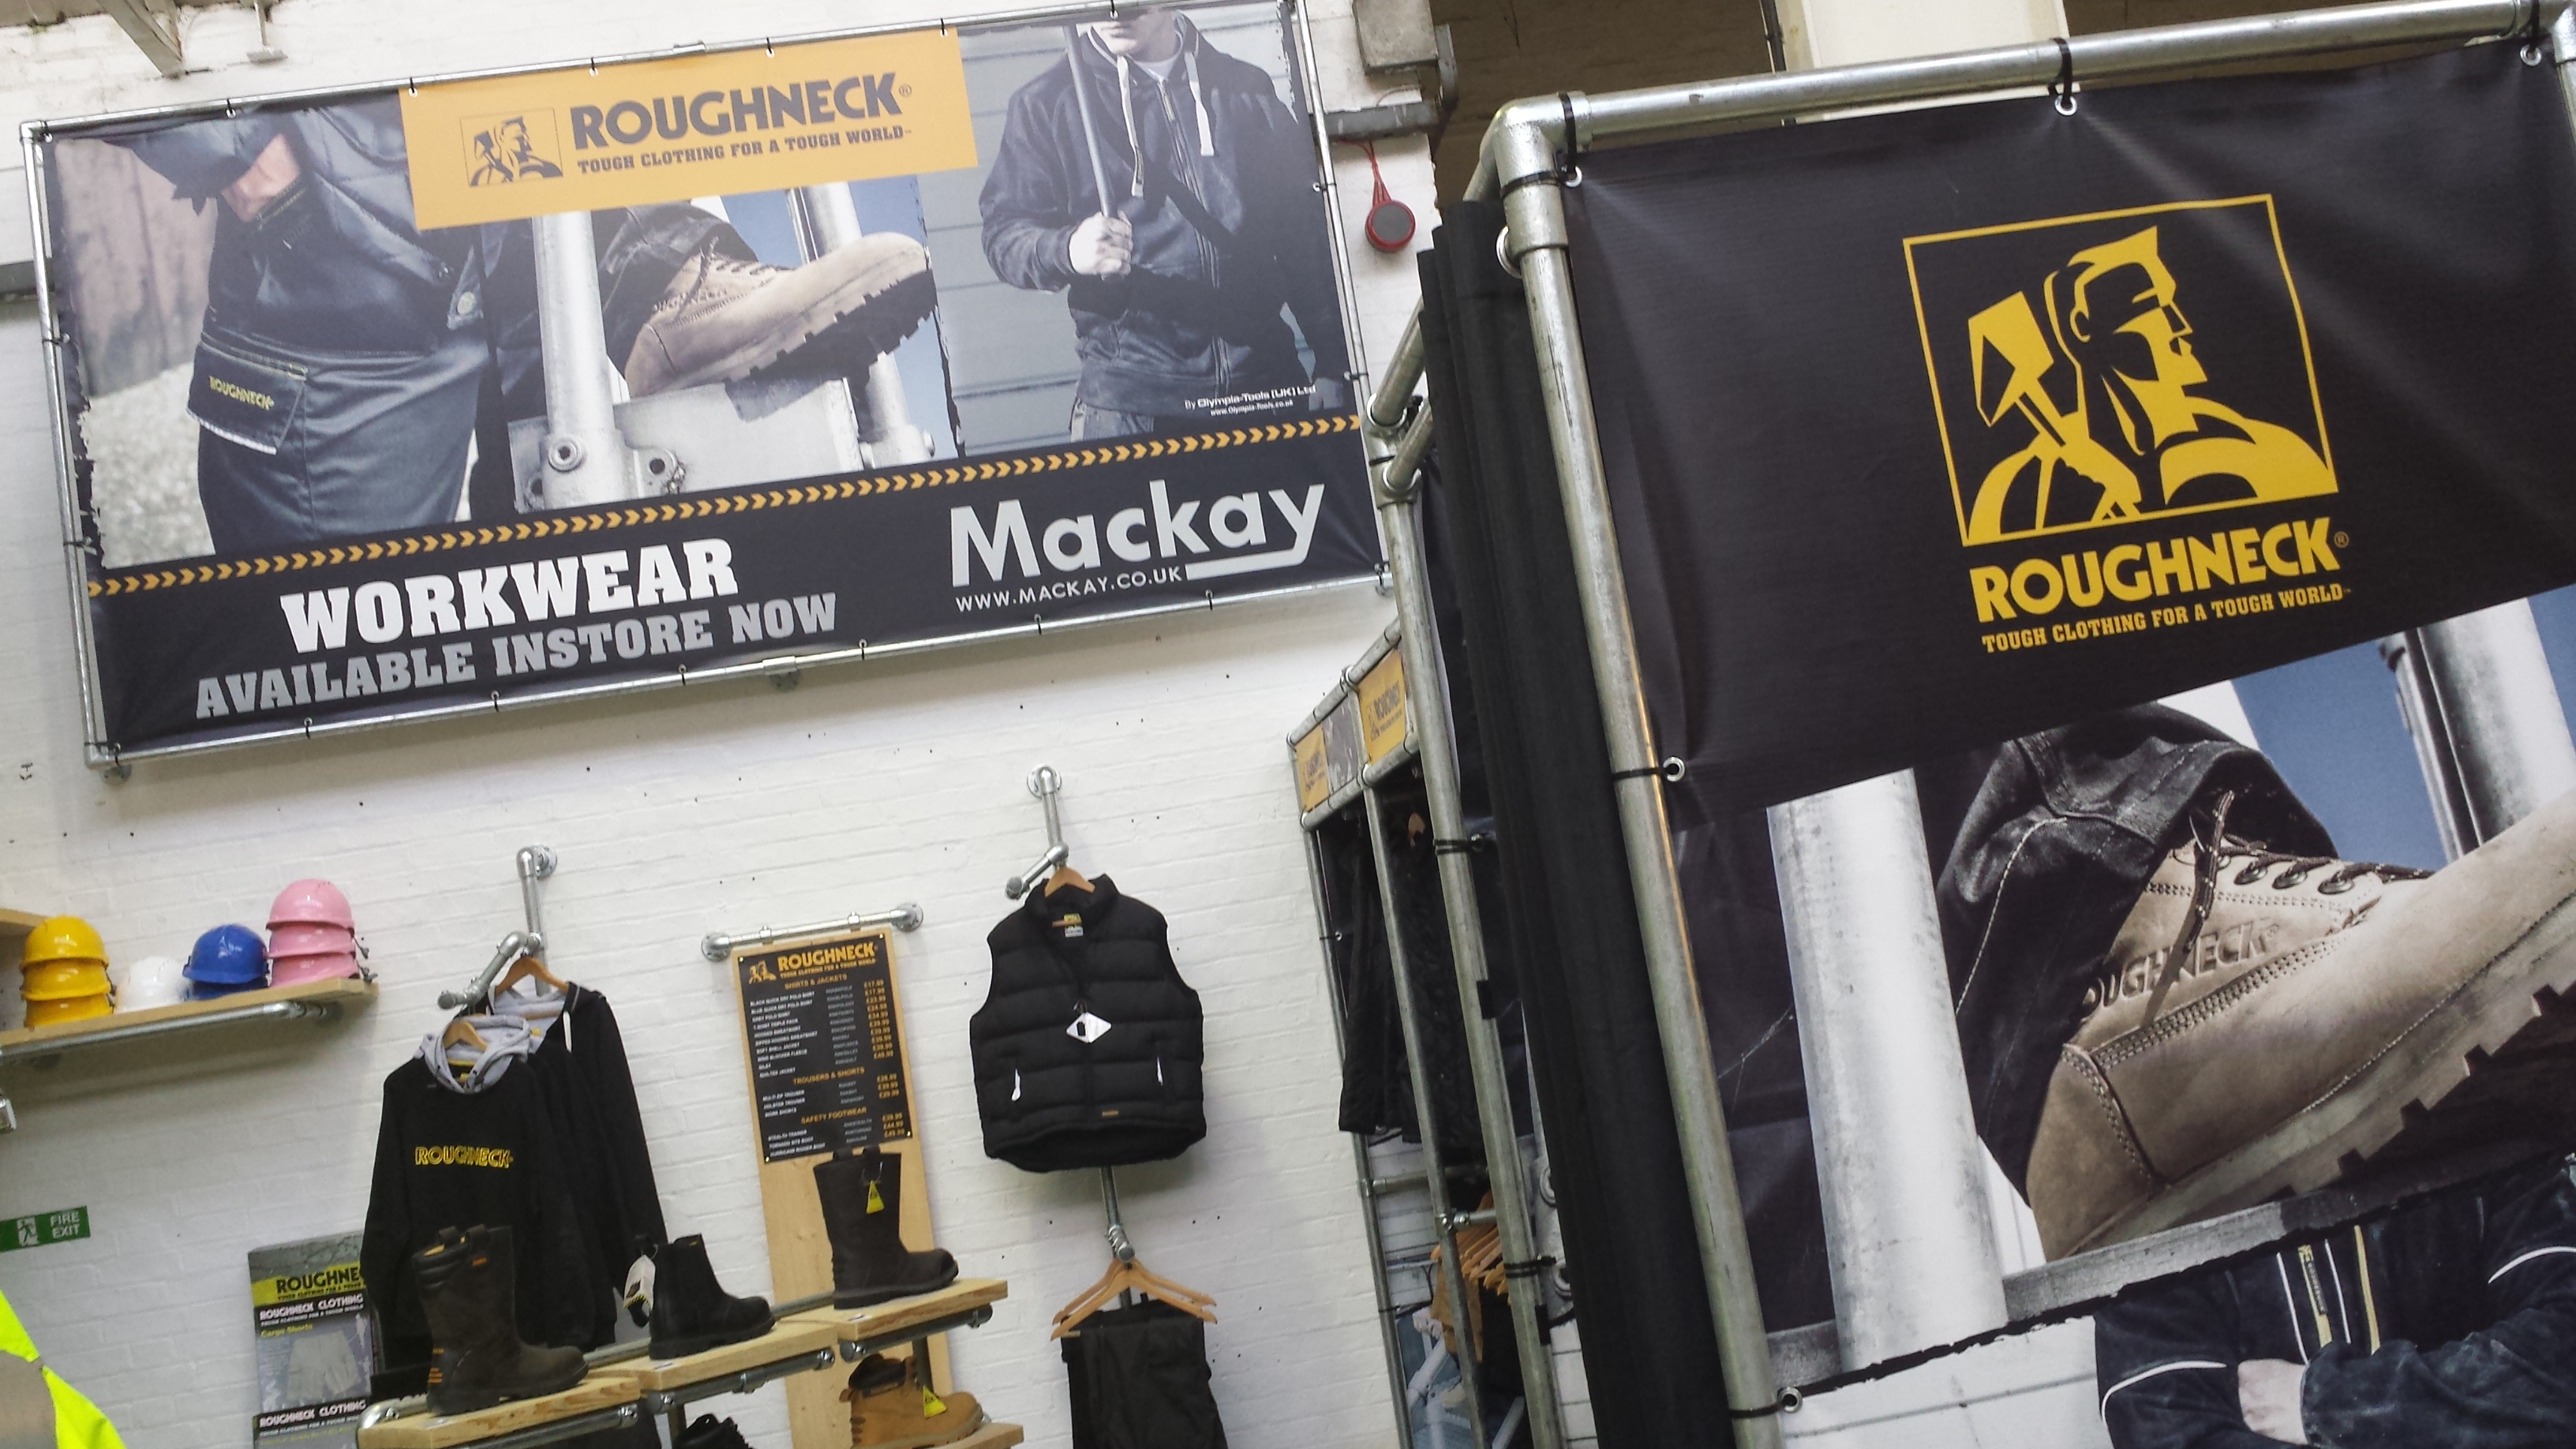 Roughneck - Our New Range of Workwear